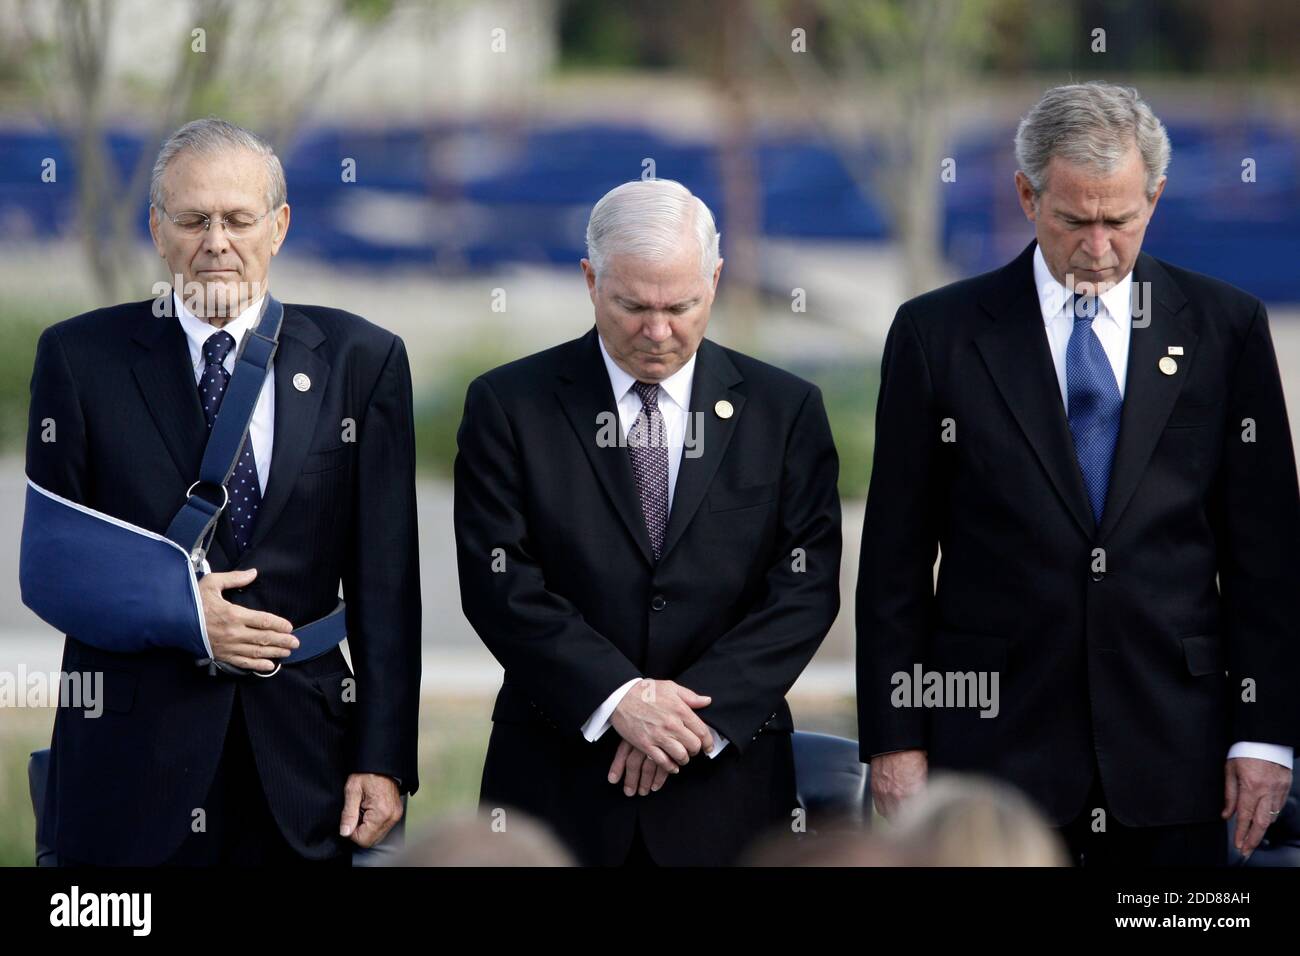 NO FILM, NO VIDEO, NO TV, NO DOCUMENTARY - President George W. Bush, right, is joined by current Secretary of Defense Robert Gates, center, and Donald Rumsfeld, the former Secretary of Defense, during the Pentagon ceremony marking the seventh anniversary of the attacks of September 2001, on September 11, 2008. Photo by Chuck Kennedy/MCT/ABACAPRESS.COM Stock Photo